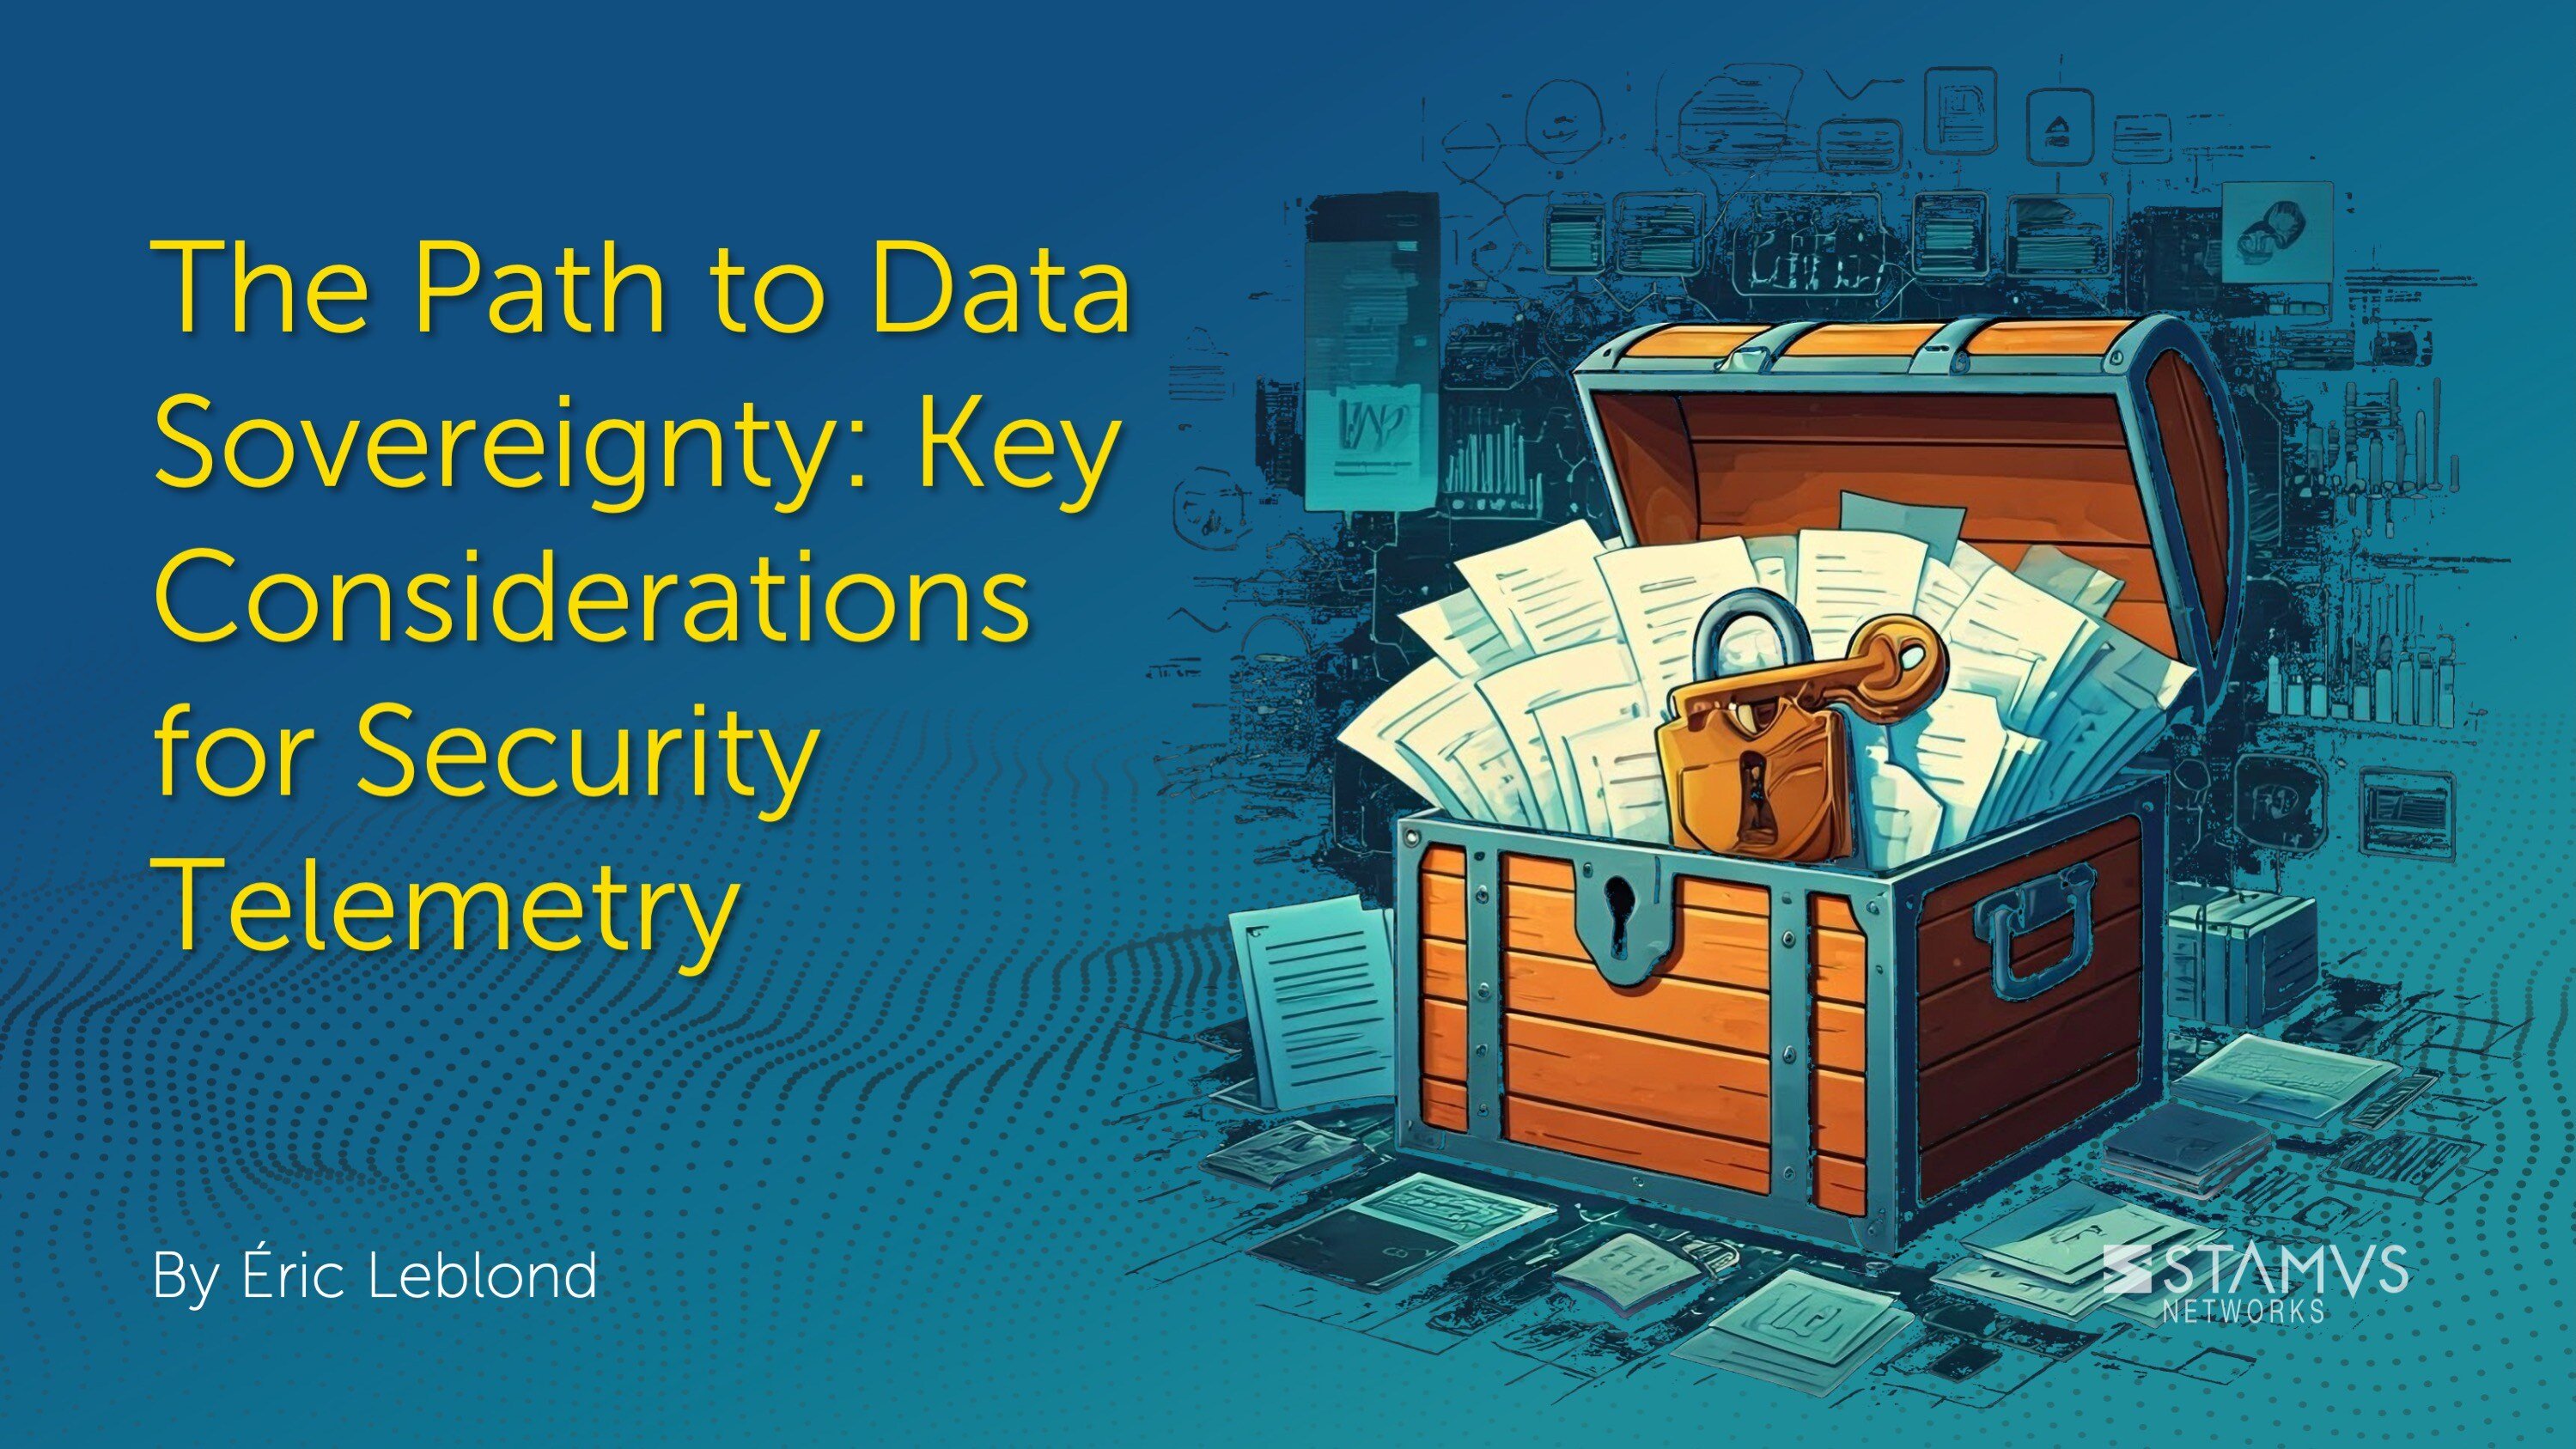 The Path to Data Sovereignty: Key Considerations for Security Telemetry by Eric Leblond